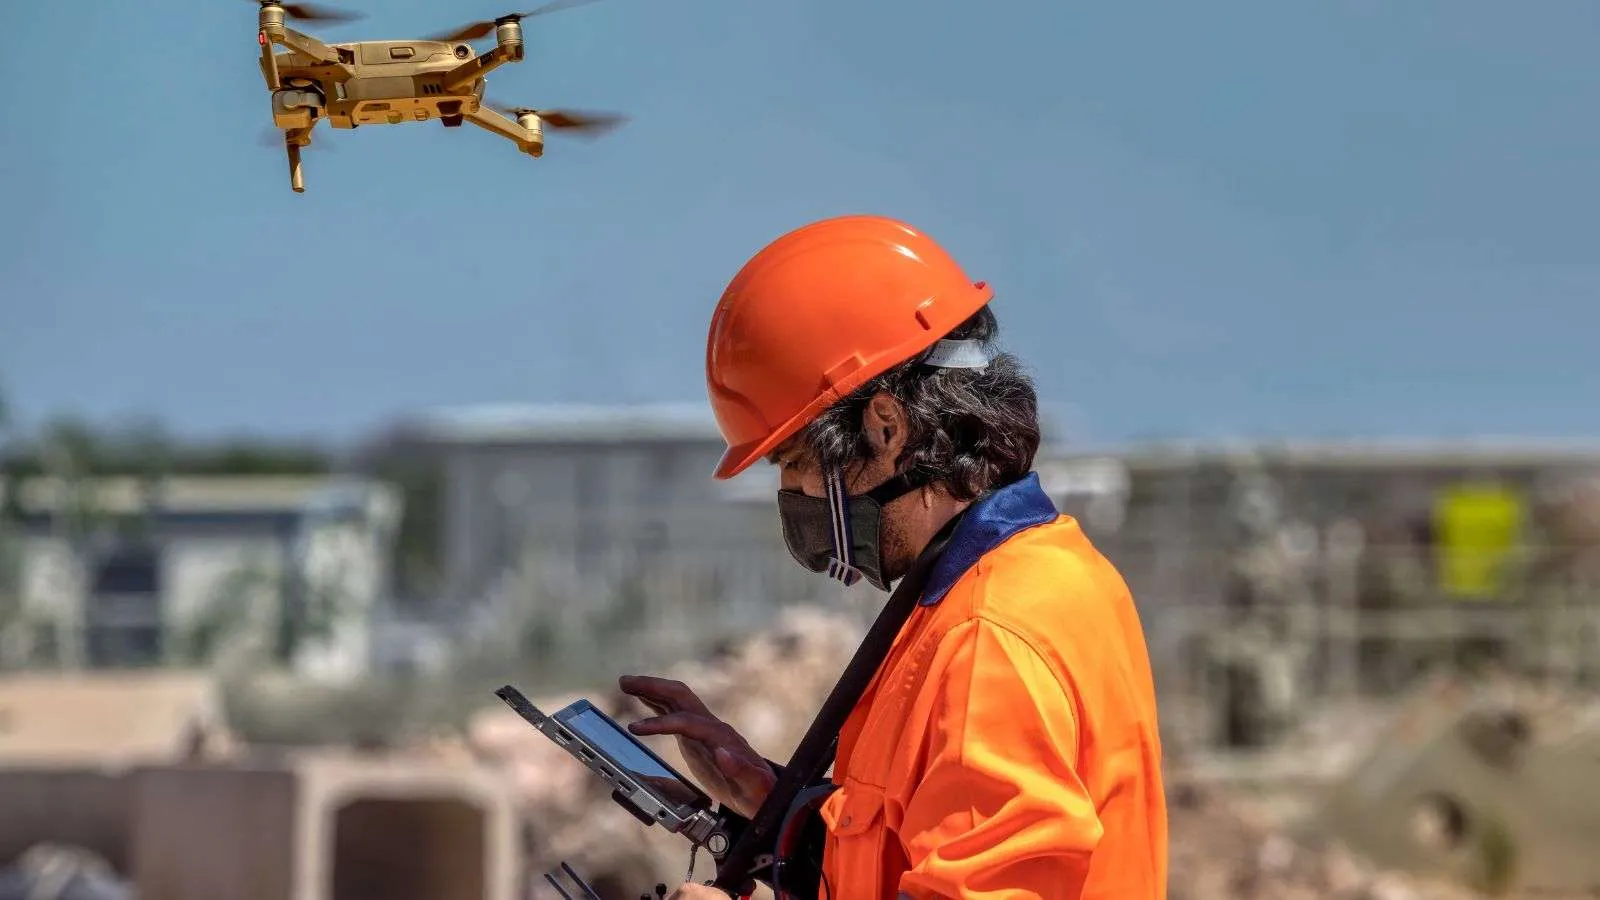 future-proofing roofing business integrating drones successfully - bighomeprojects.com